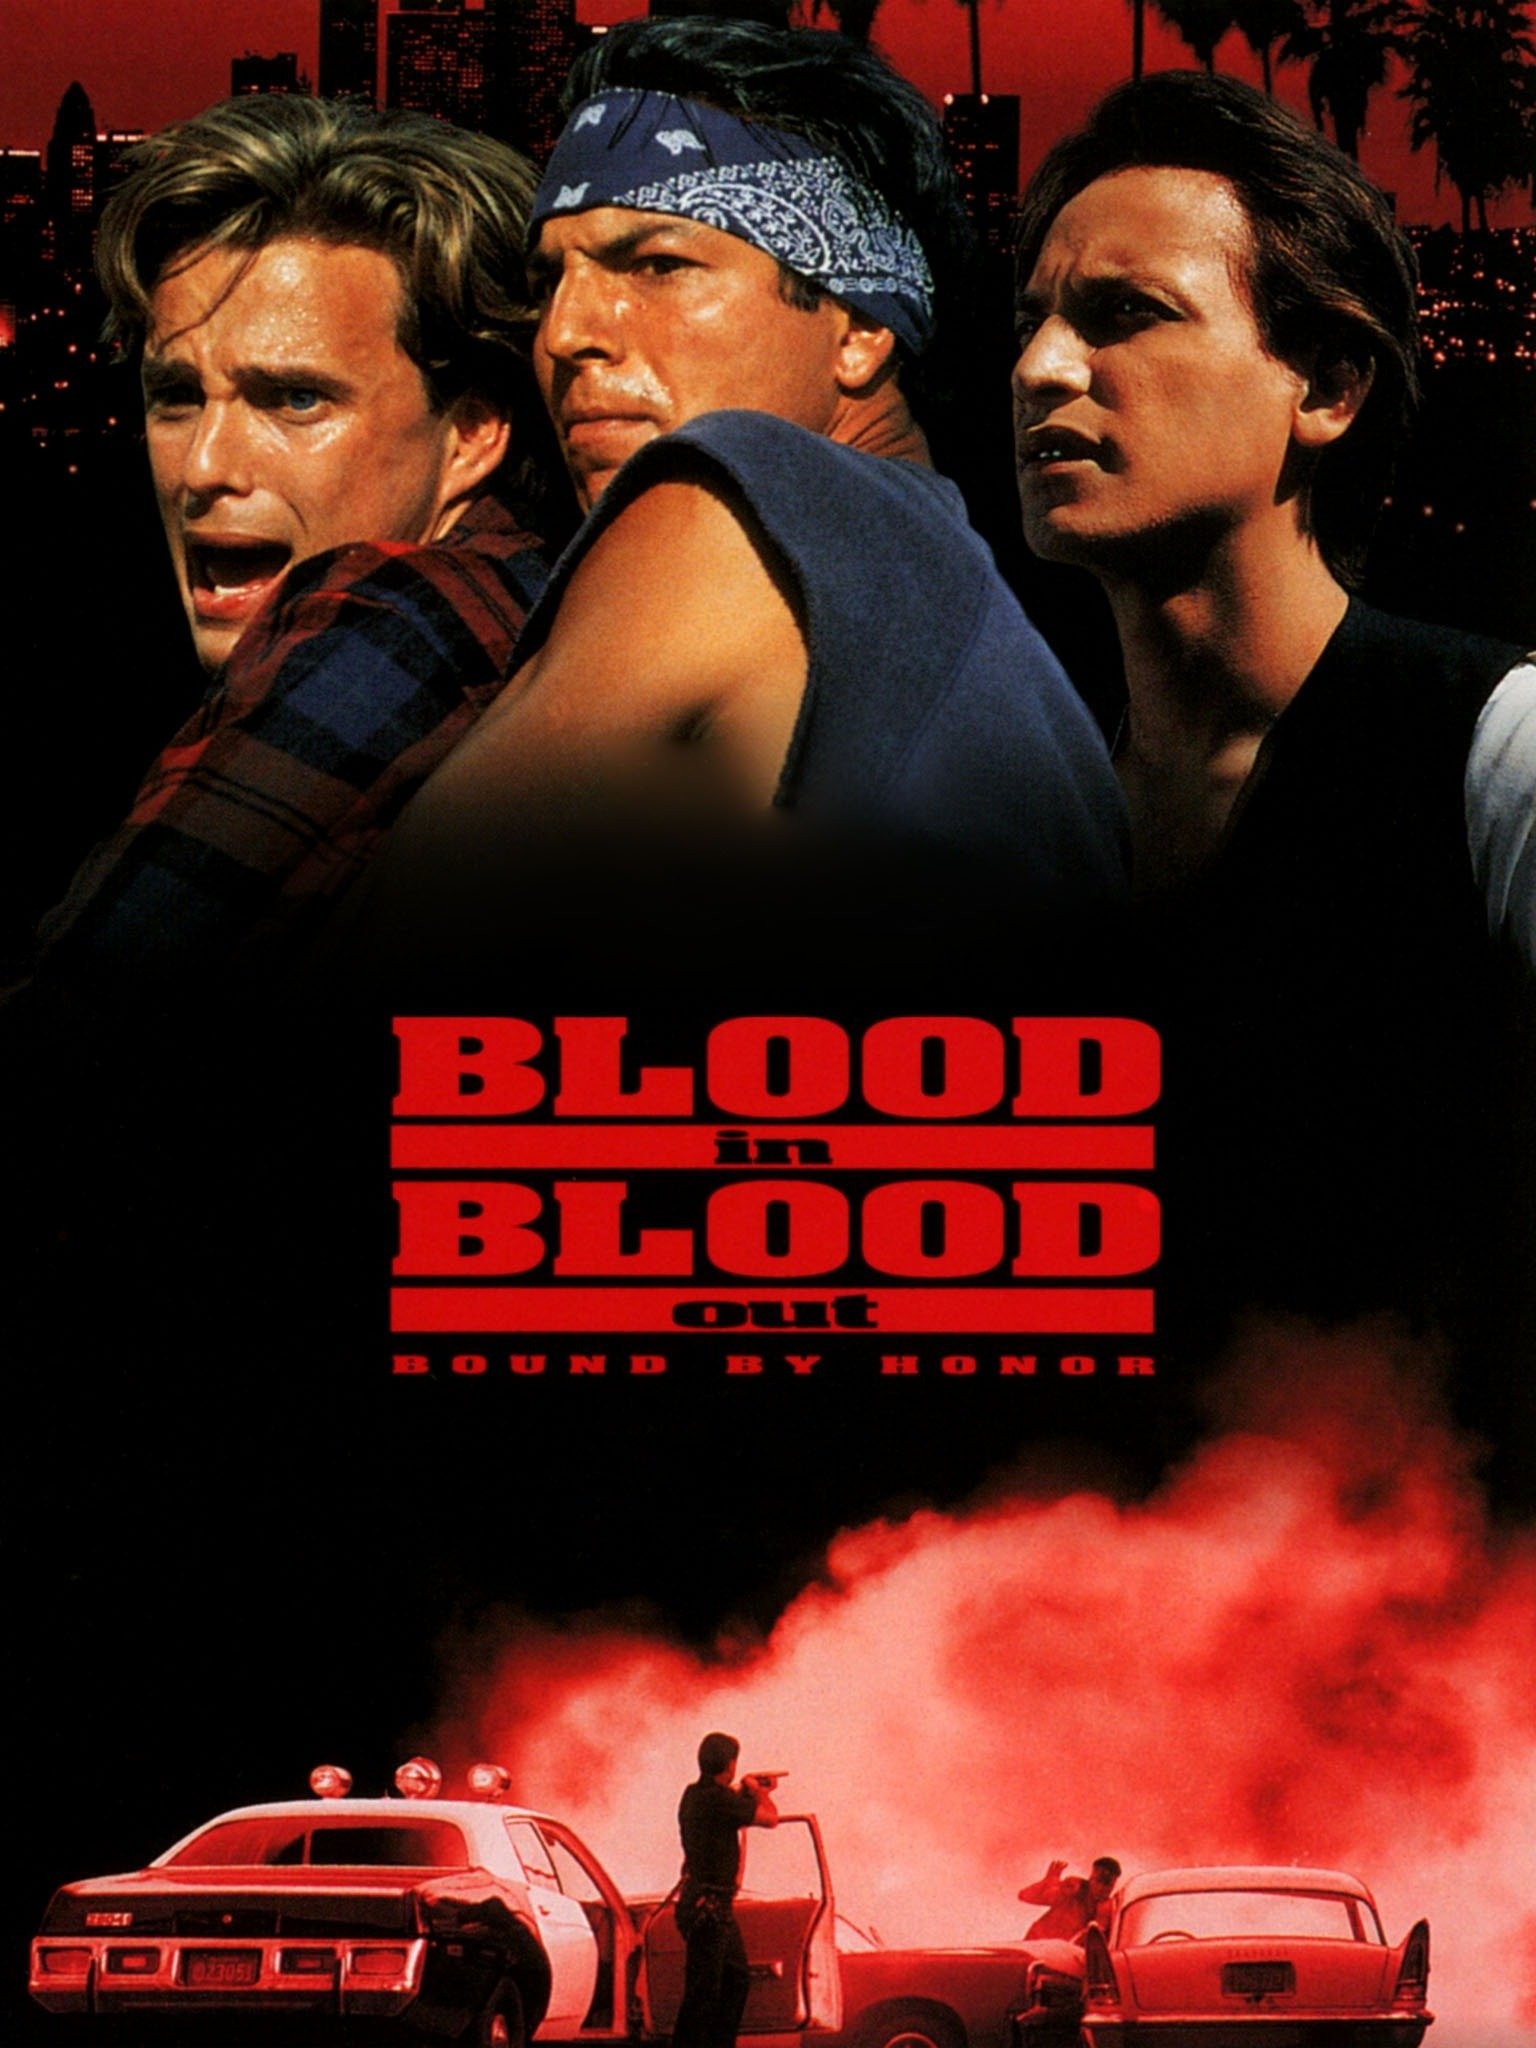 anna bialek recommends Full Movie Blood In Blood Out